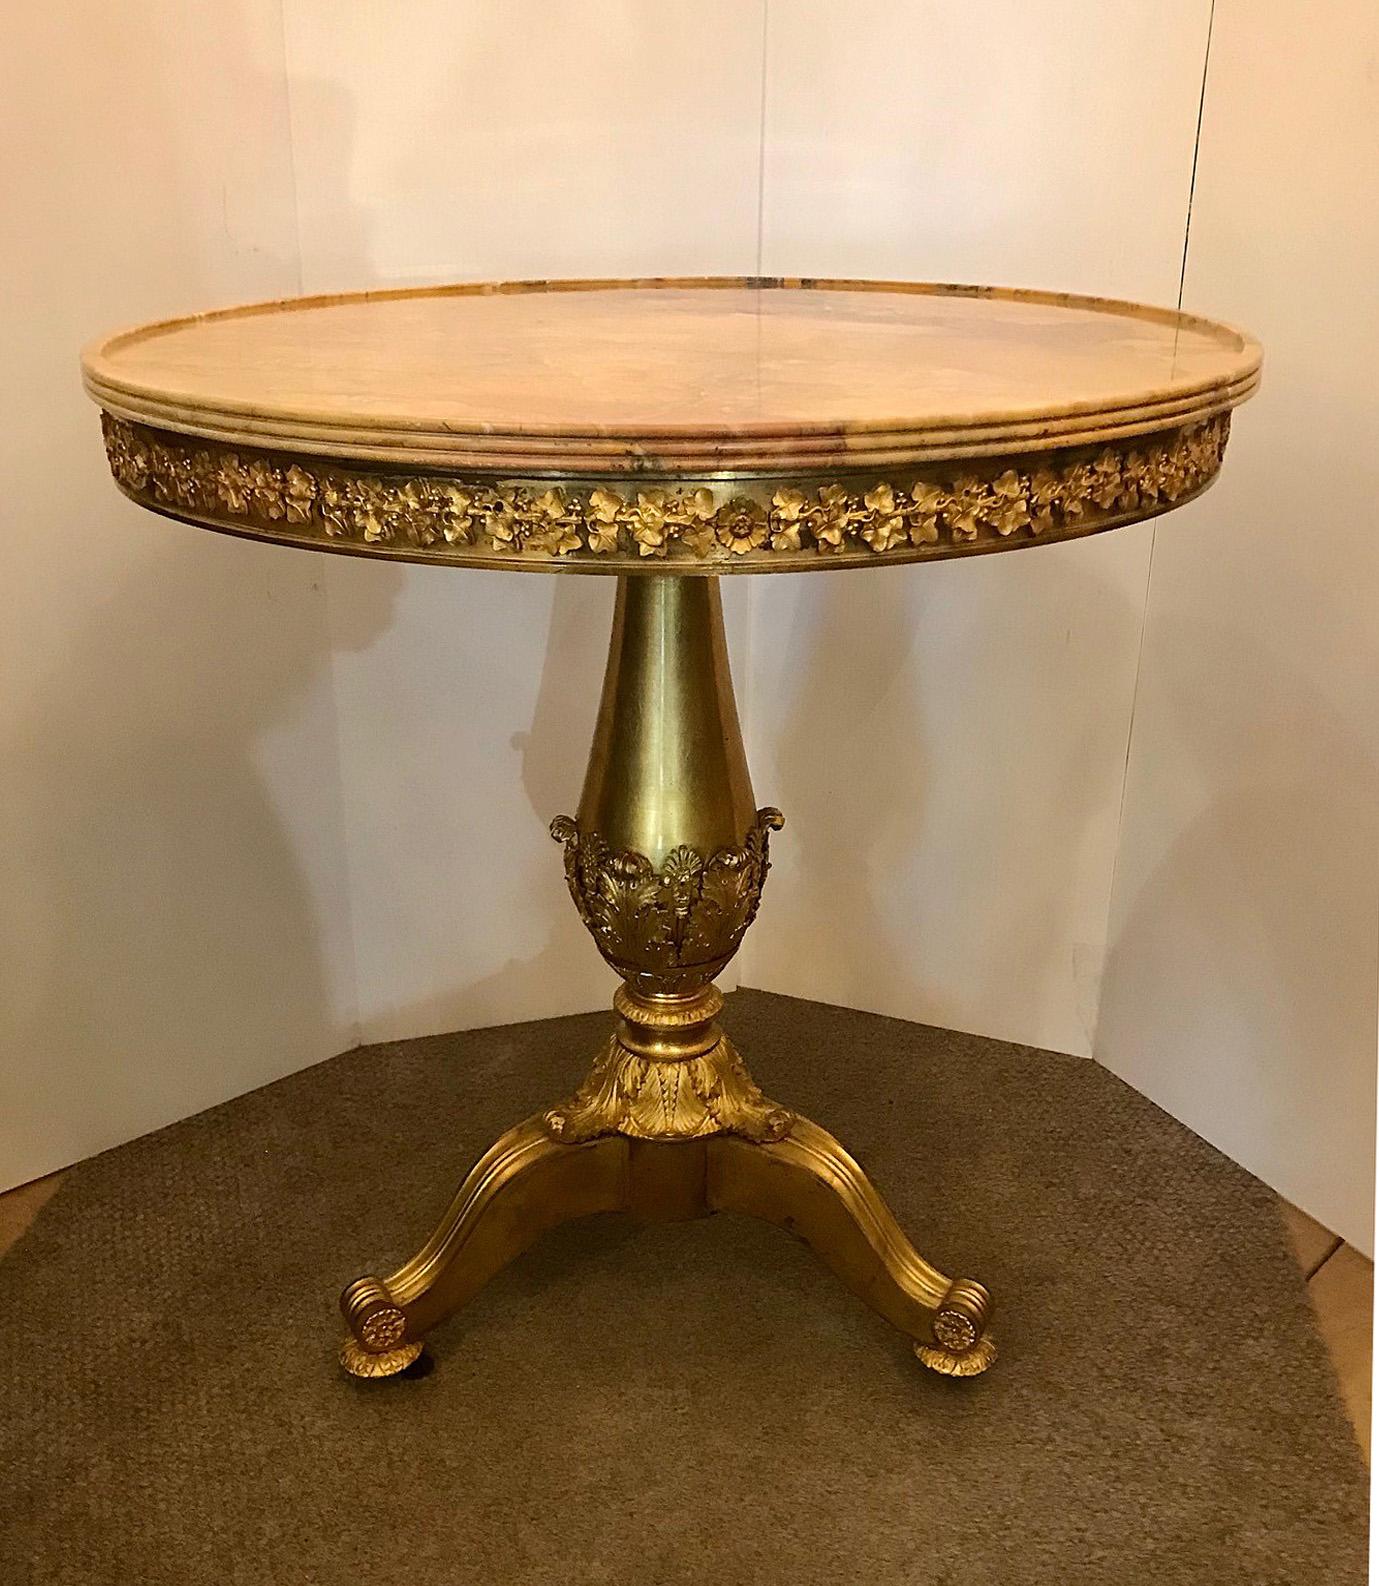 An important Restauration period ormolu Gueridon, c. 1820, Attributed to Pierre-Philippe Thomire (1751-1843).   
With a round Siena marble molded edge top, the frieze with a plain molded border and applied with a repeat of trailing vine and rosette